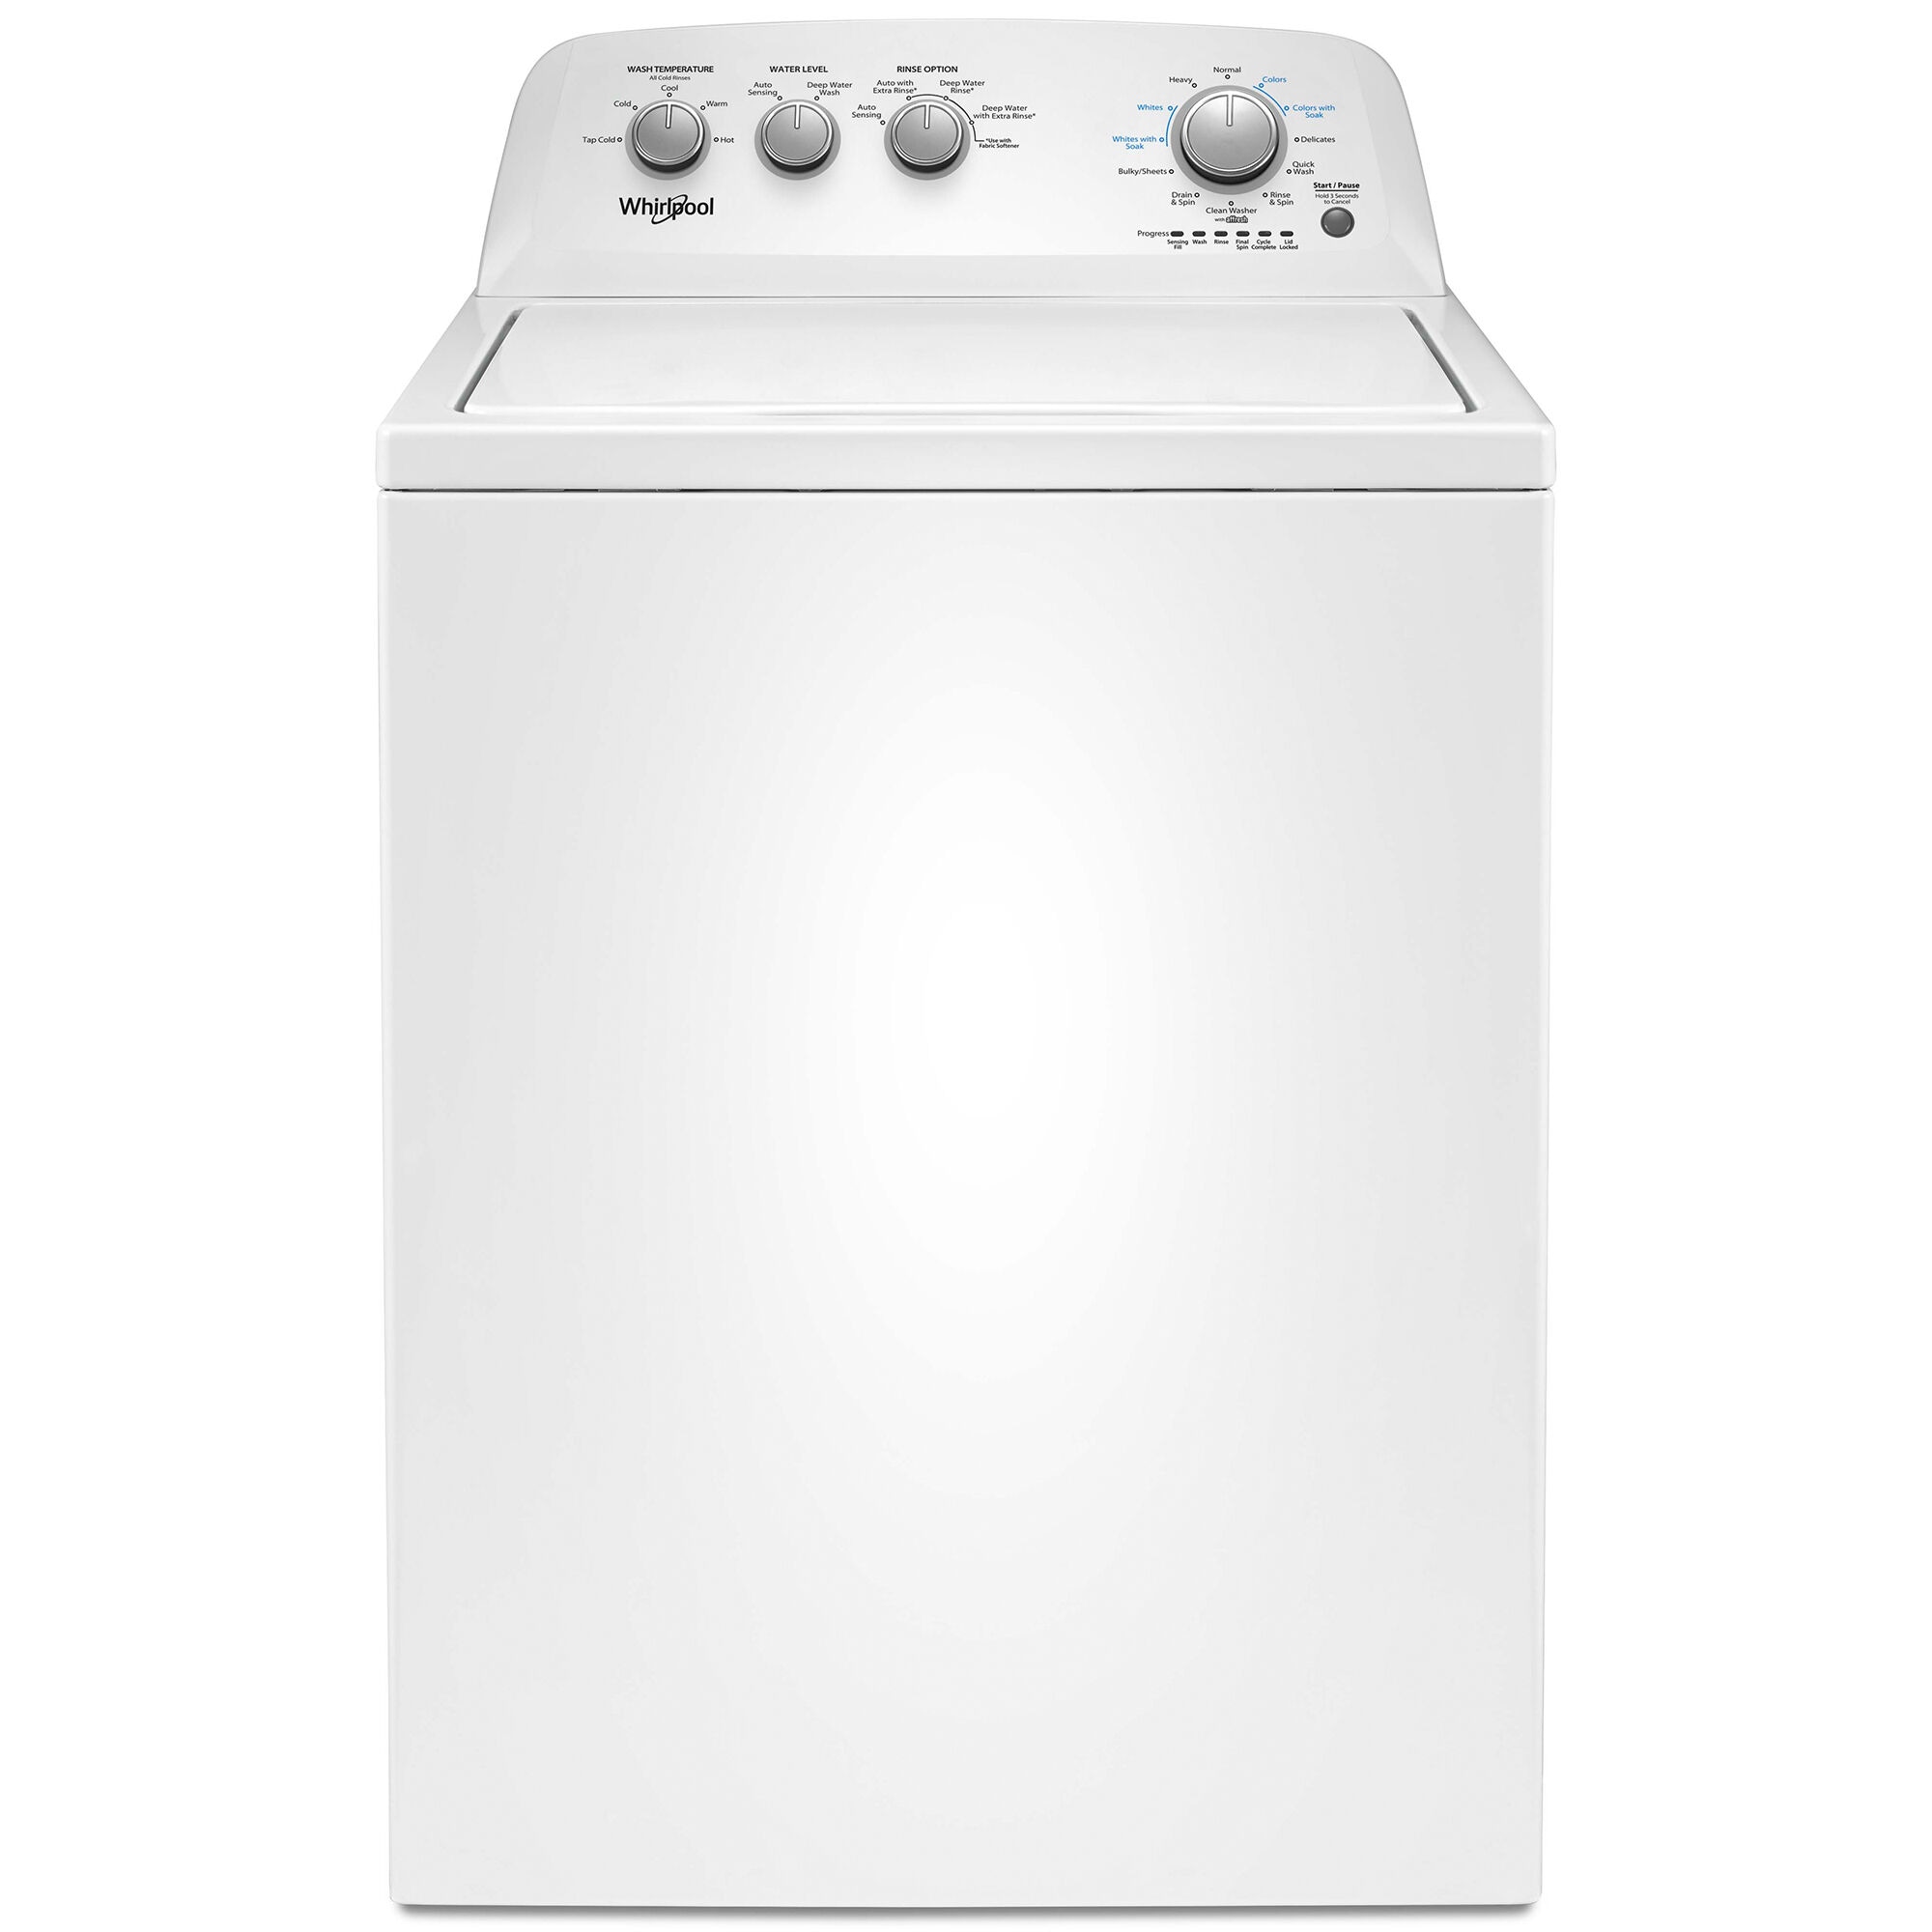 Whirlpool 27.5 in. 3.8 cu. ft. Top Load Washer - White